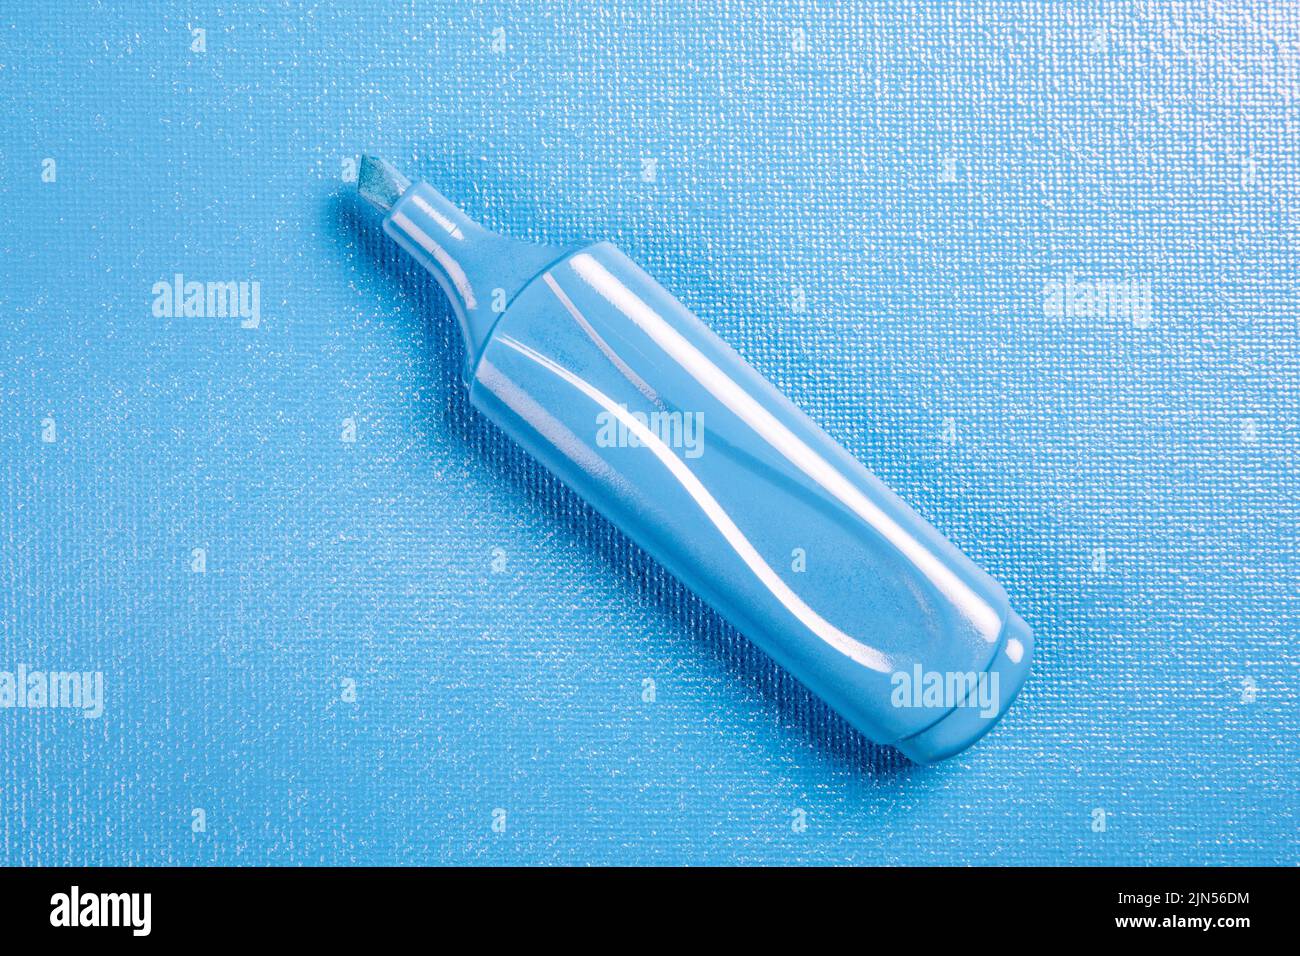 Blue marker on a blue textured background. Stock Photo